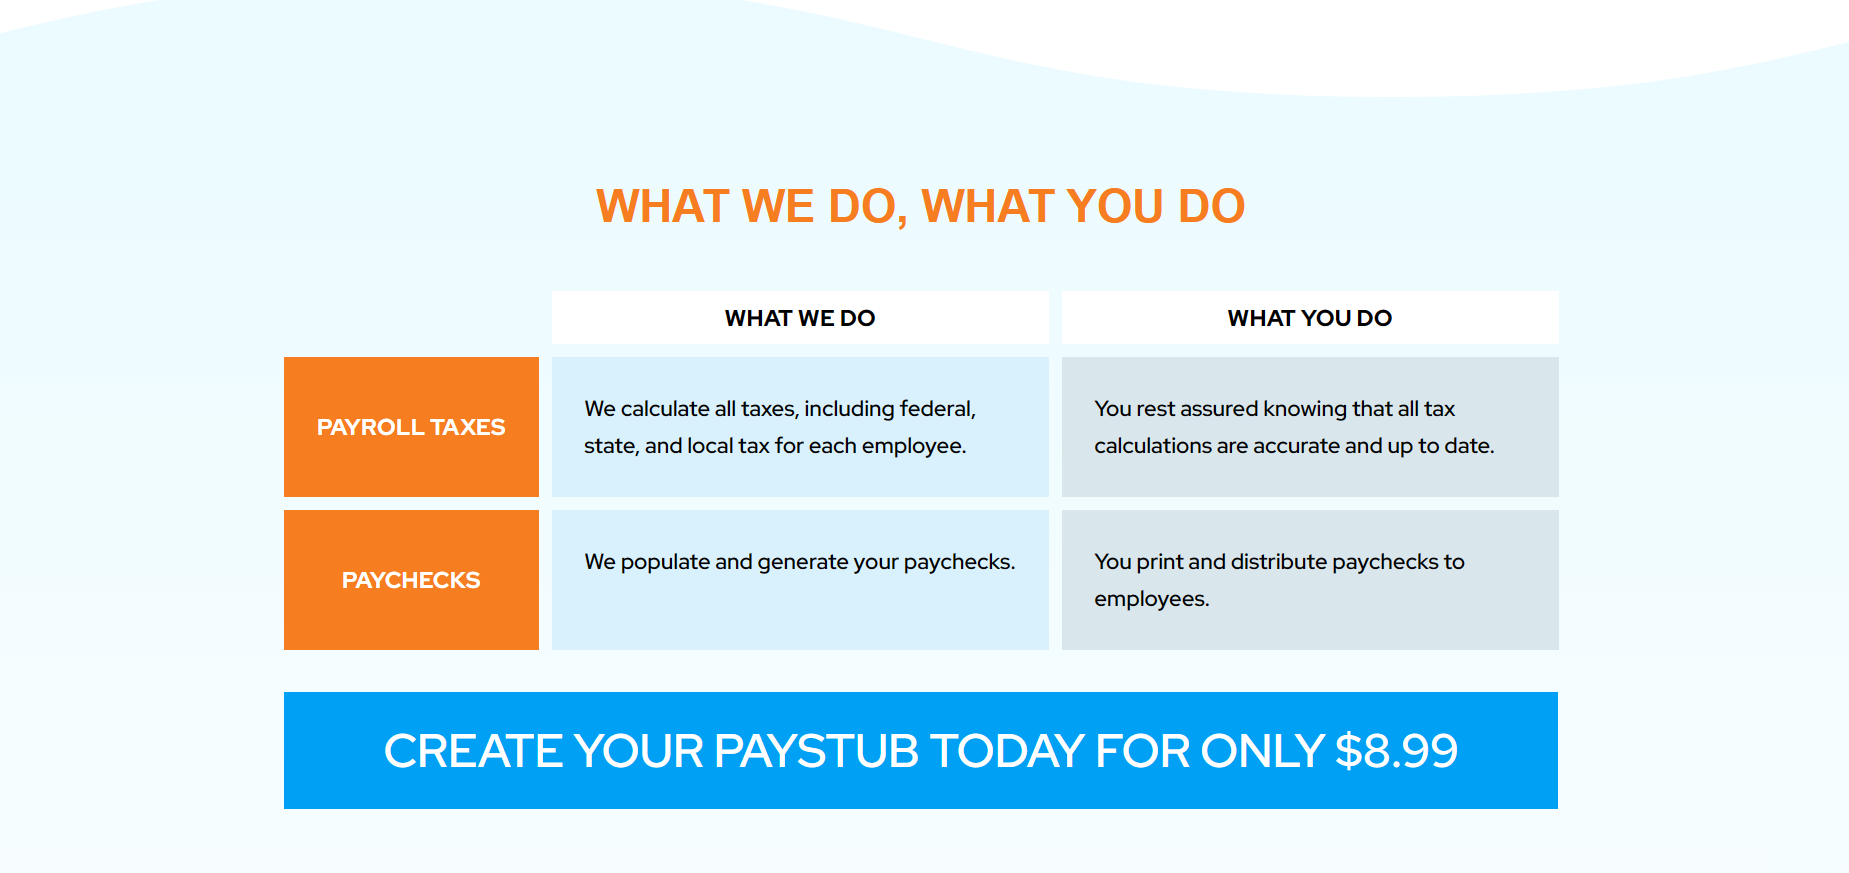 how to pay yourself as an llc paystub